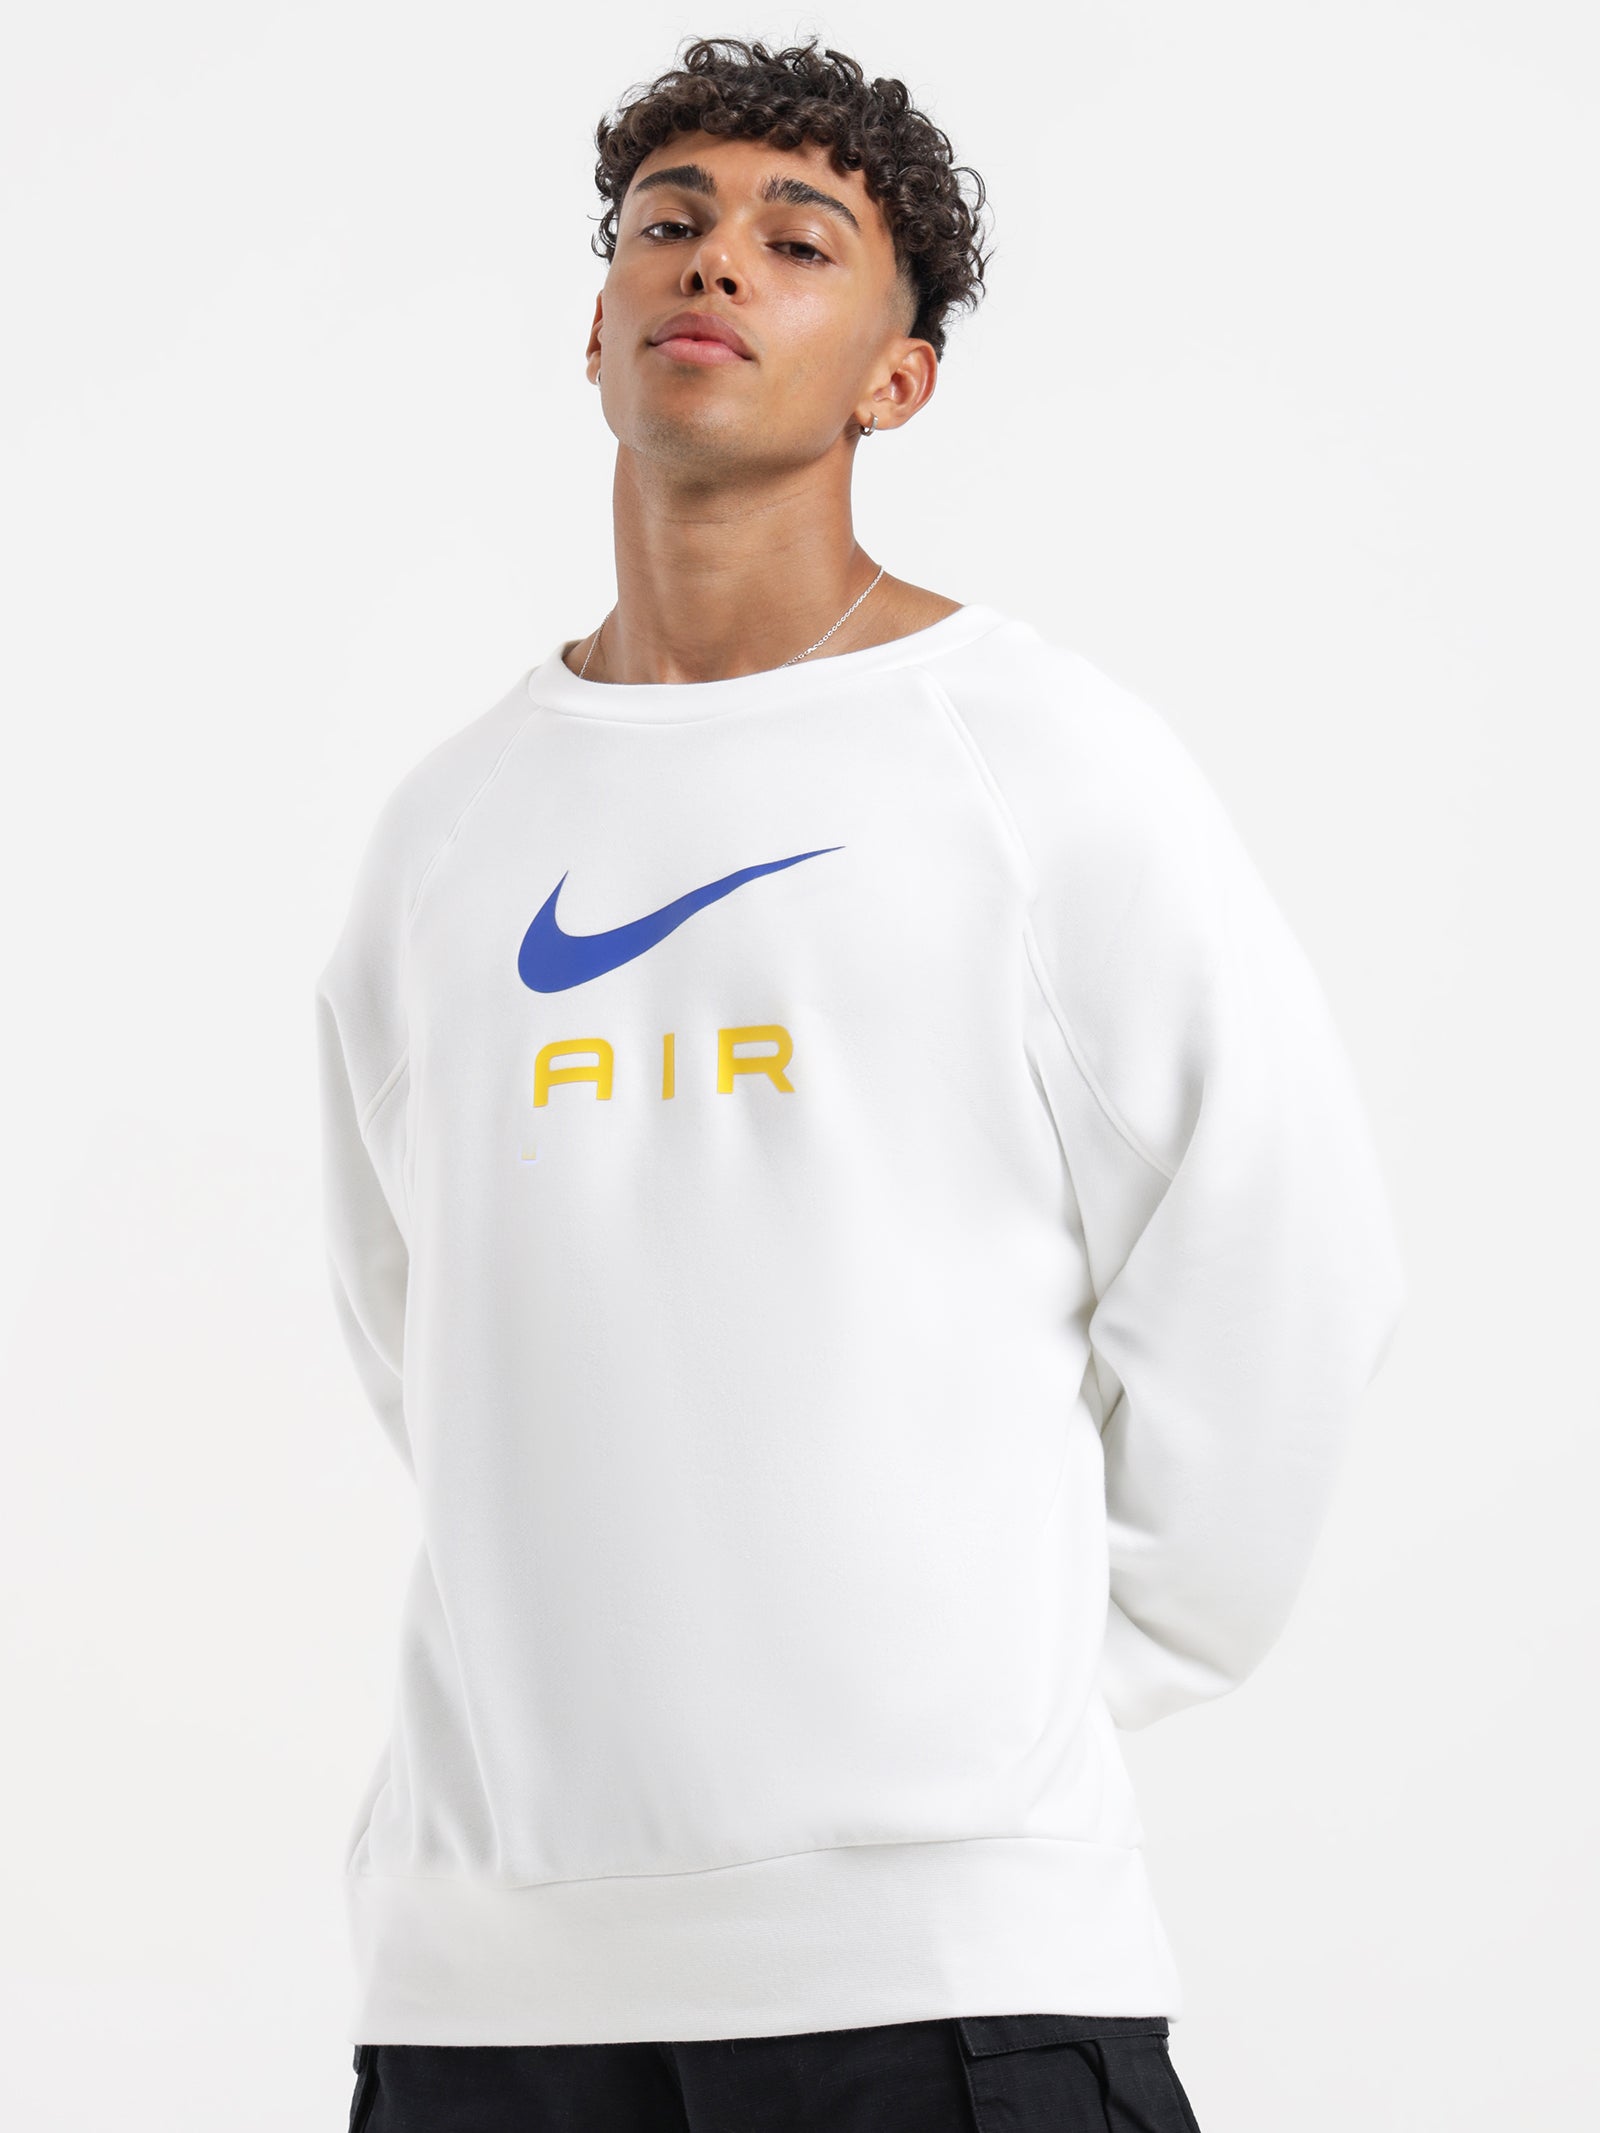 Nike Clothing Shoes Online Glue Store